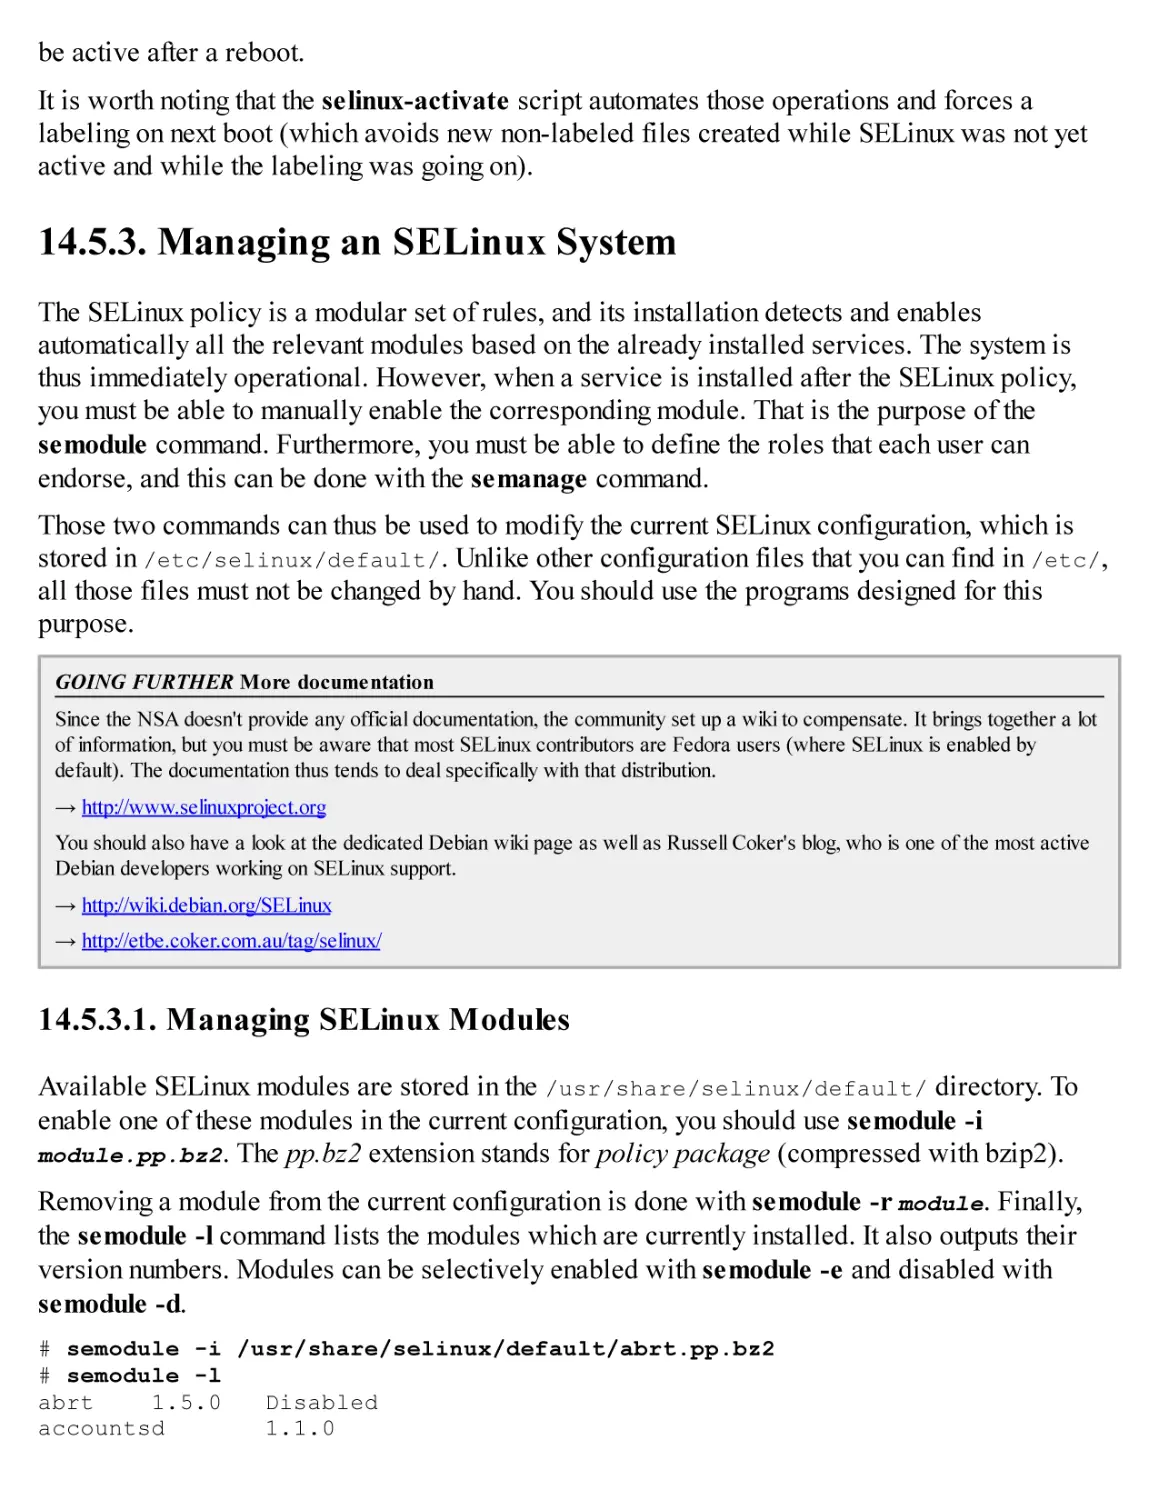 14.5.3. Managing an SELinux System
14.5.3.1. Managing SELinux Modules